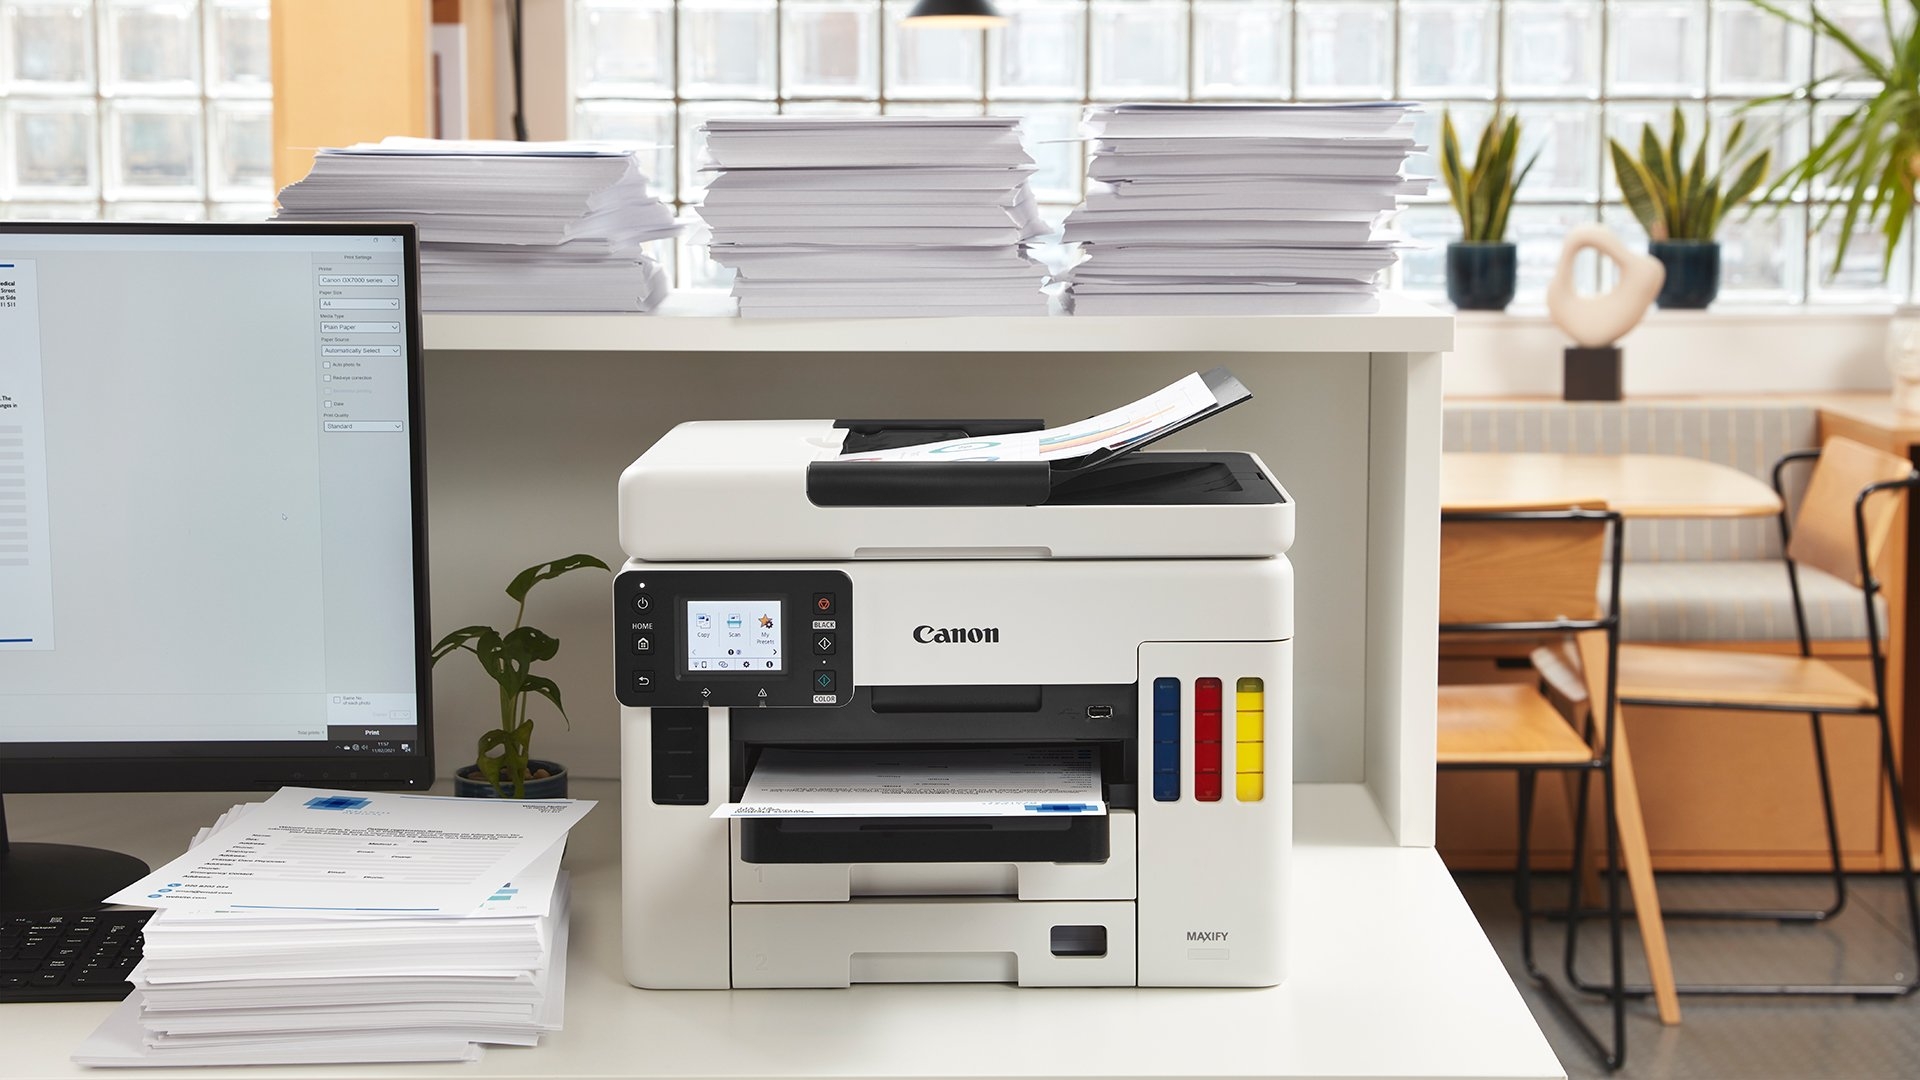 How to Install Canon MAXIFY Printer on Linux Mint Distro - Featured